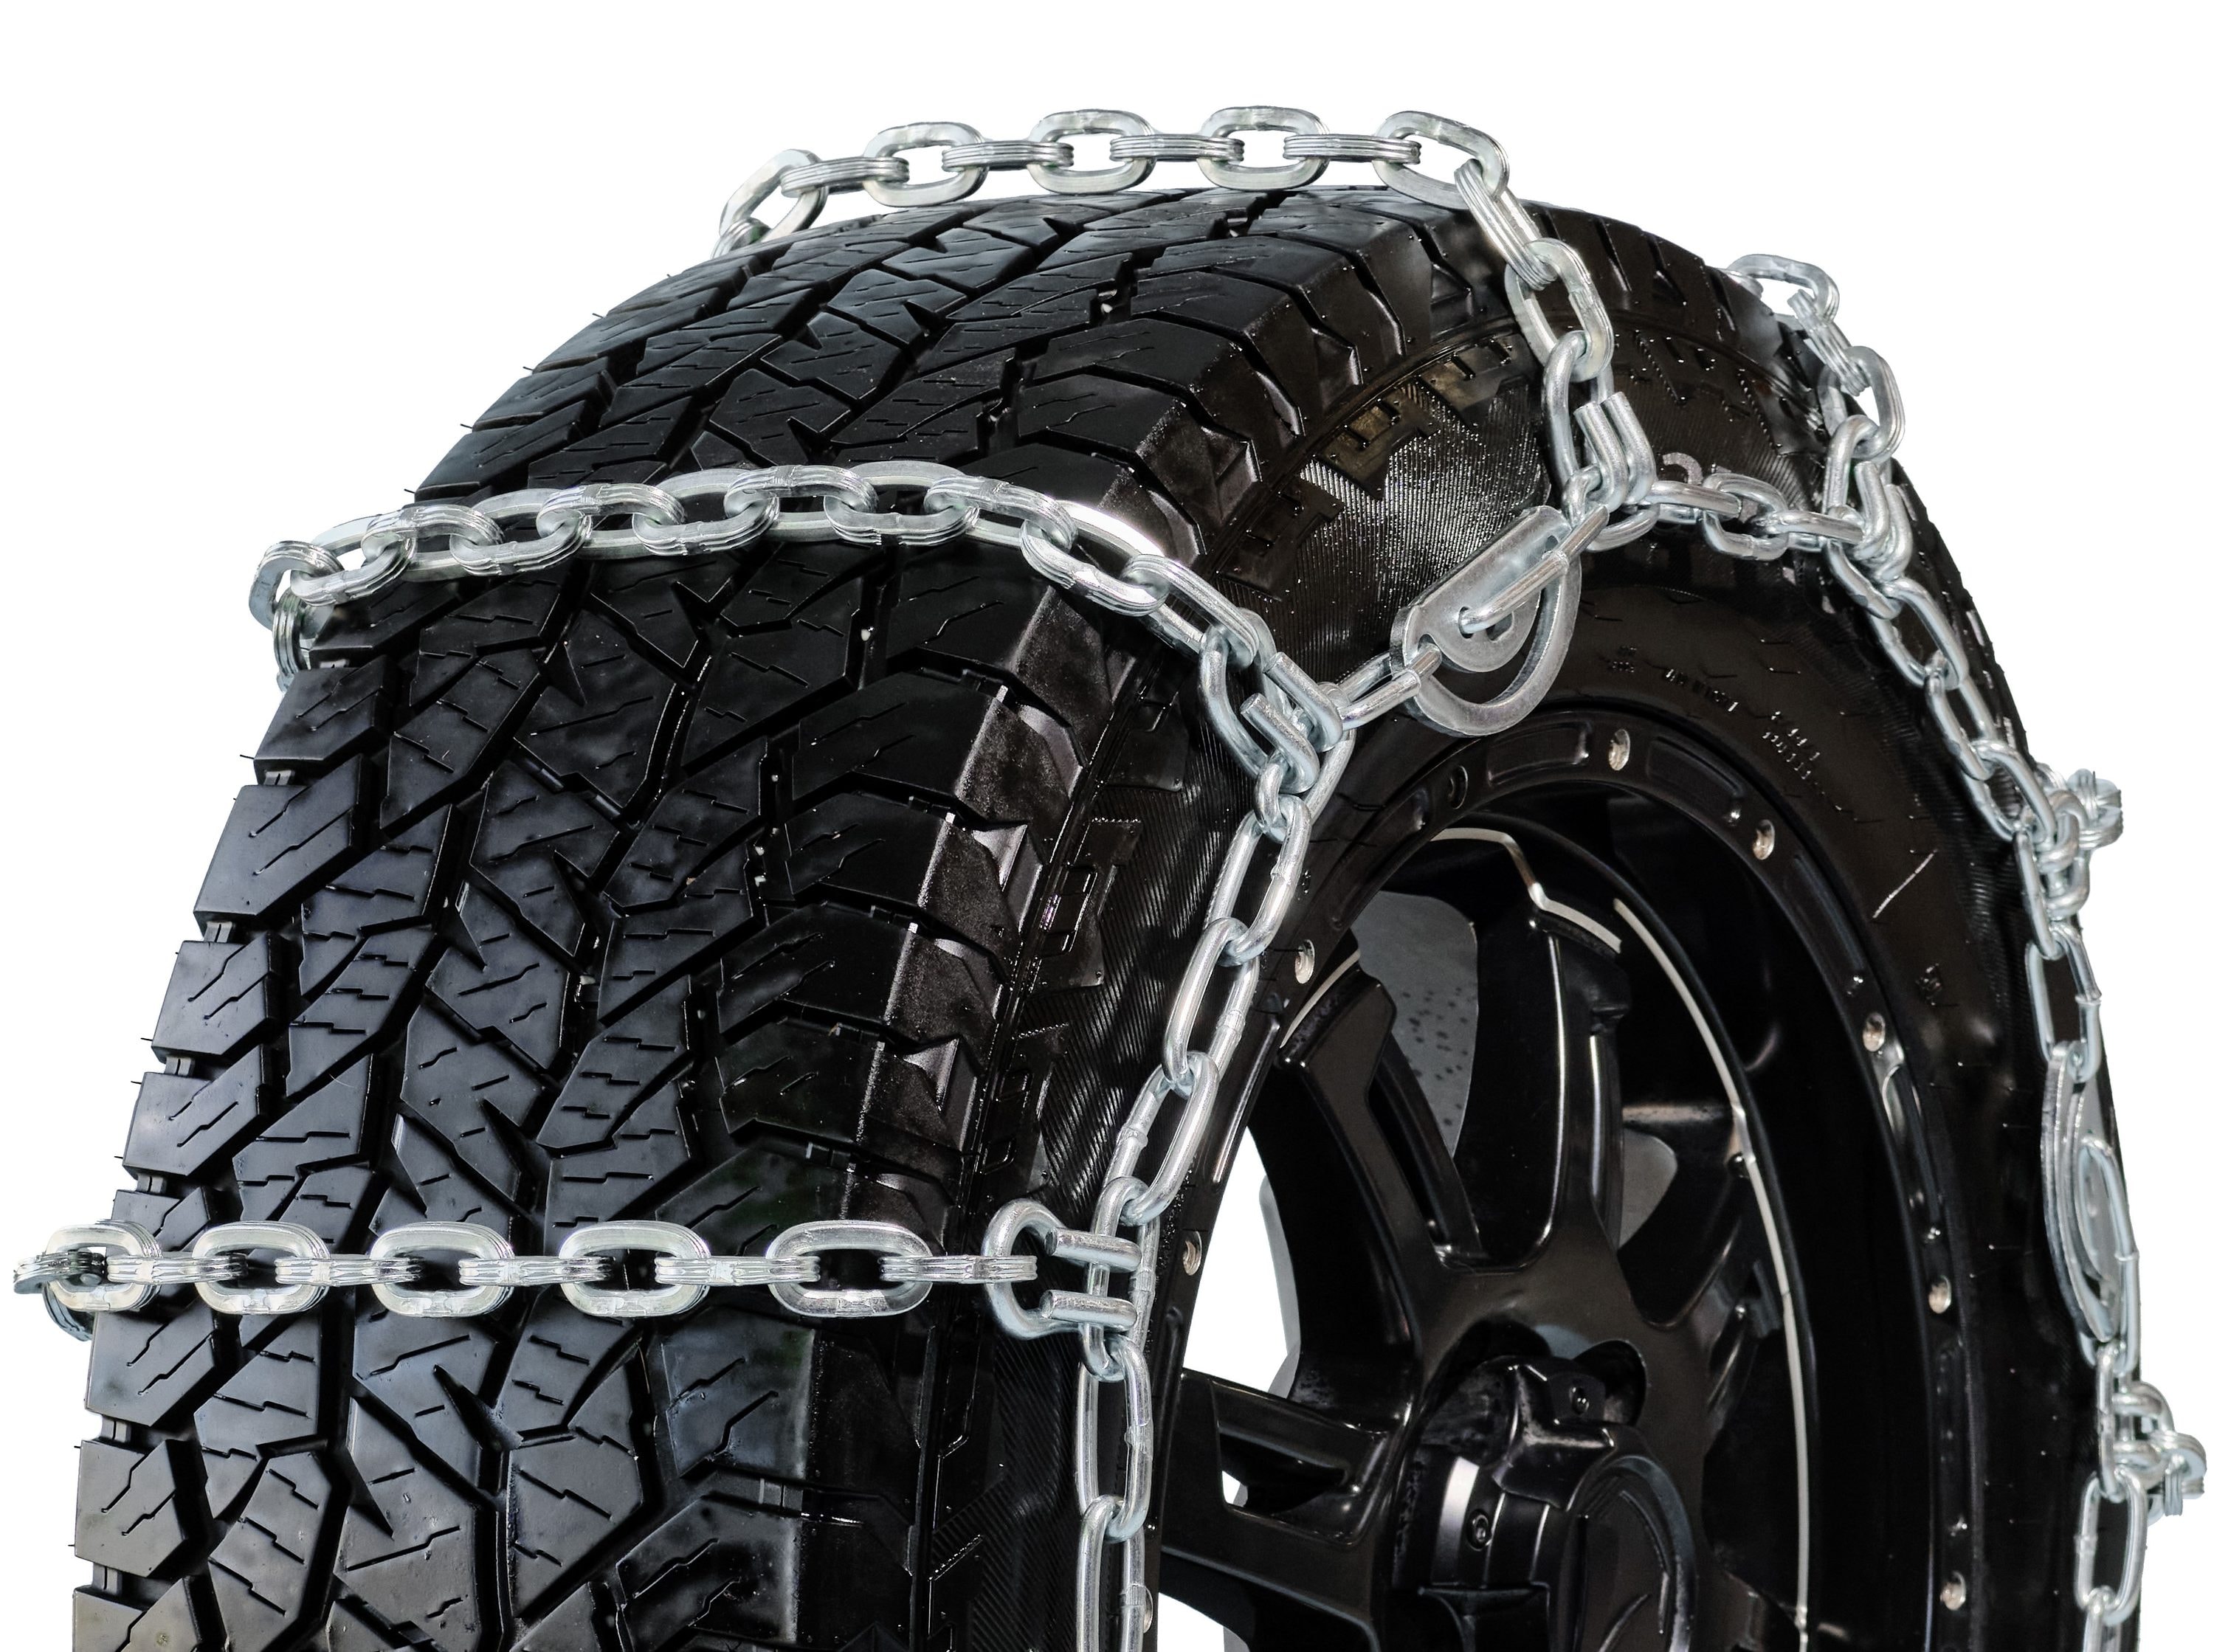 pewag Pick up truck Tire Chains - Made in the USA of 7mm Nickel